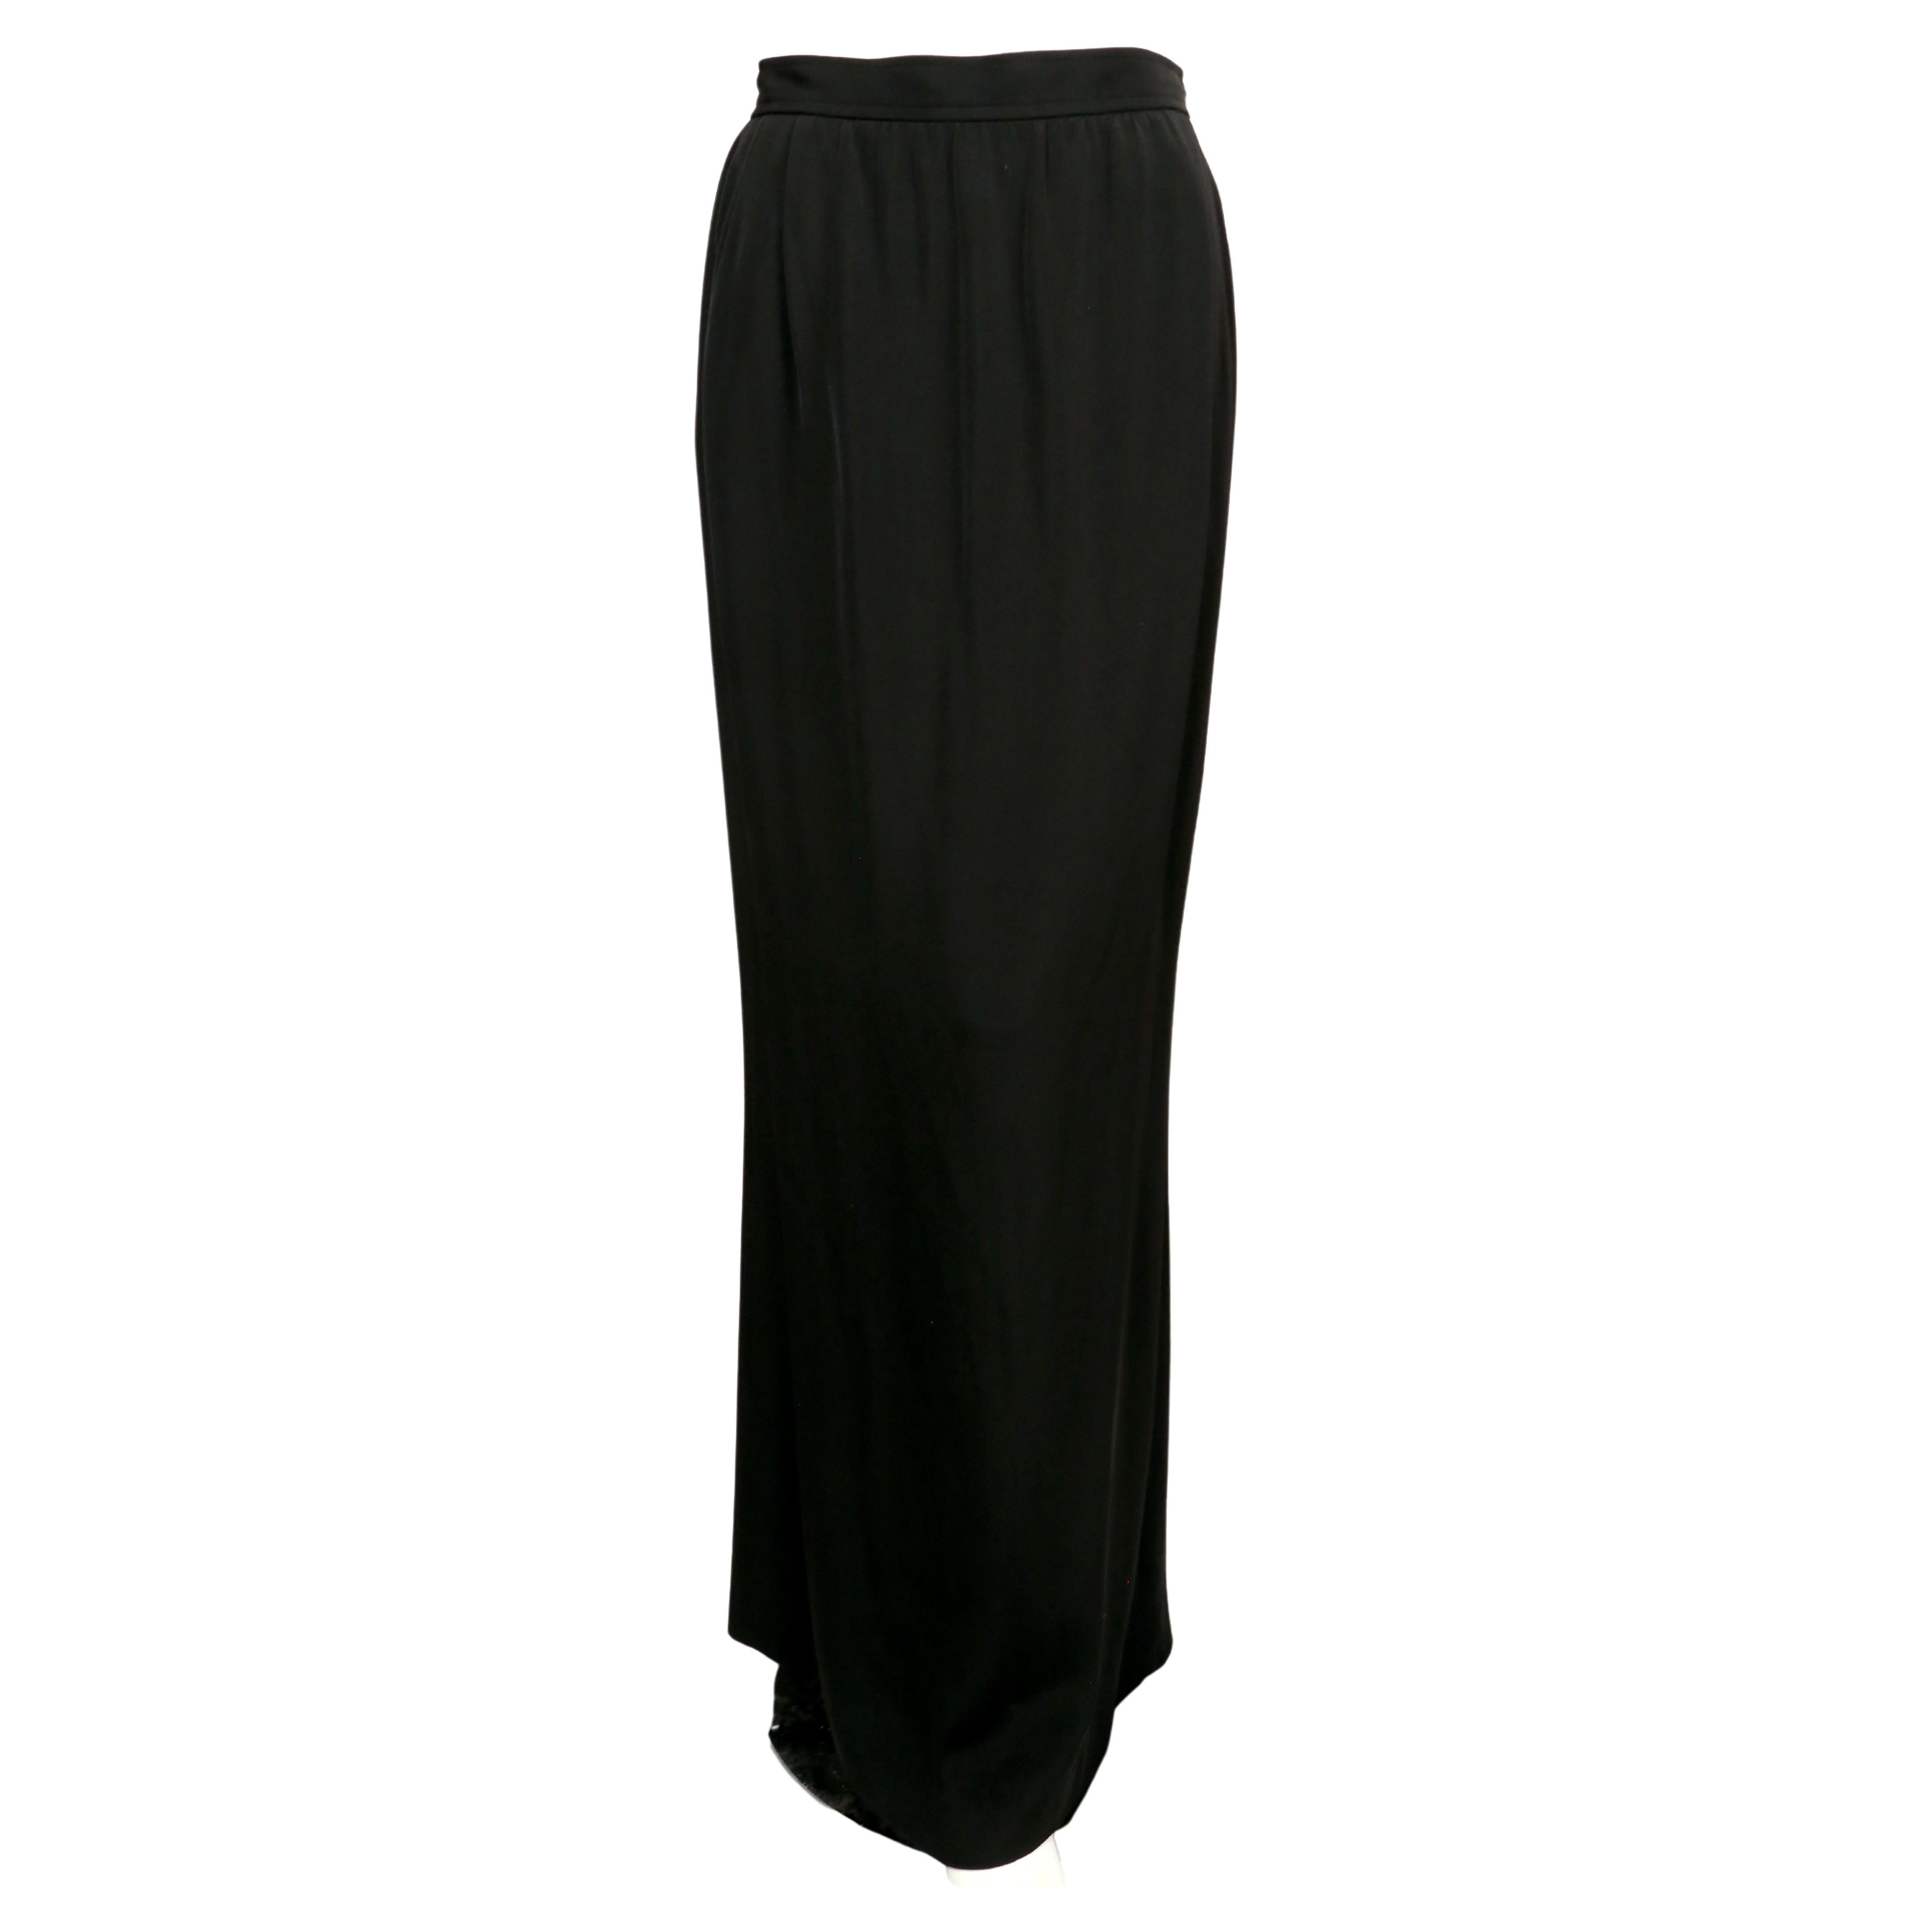 Jet-black, crepe, maxi skirt with rhinestone button detail at back designed by Yves Saint Laurent dating to the early 1980's. Labeled a French size 42 however this fits small. Approximate measurements: waist 28